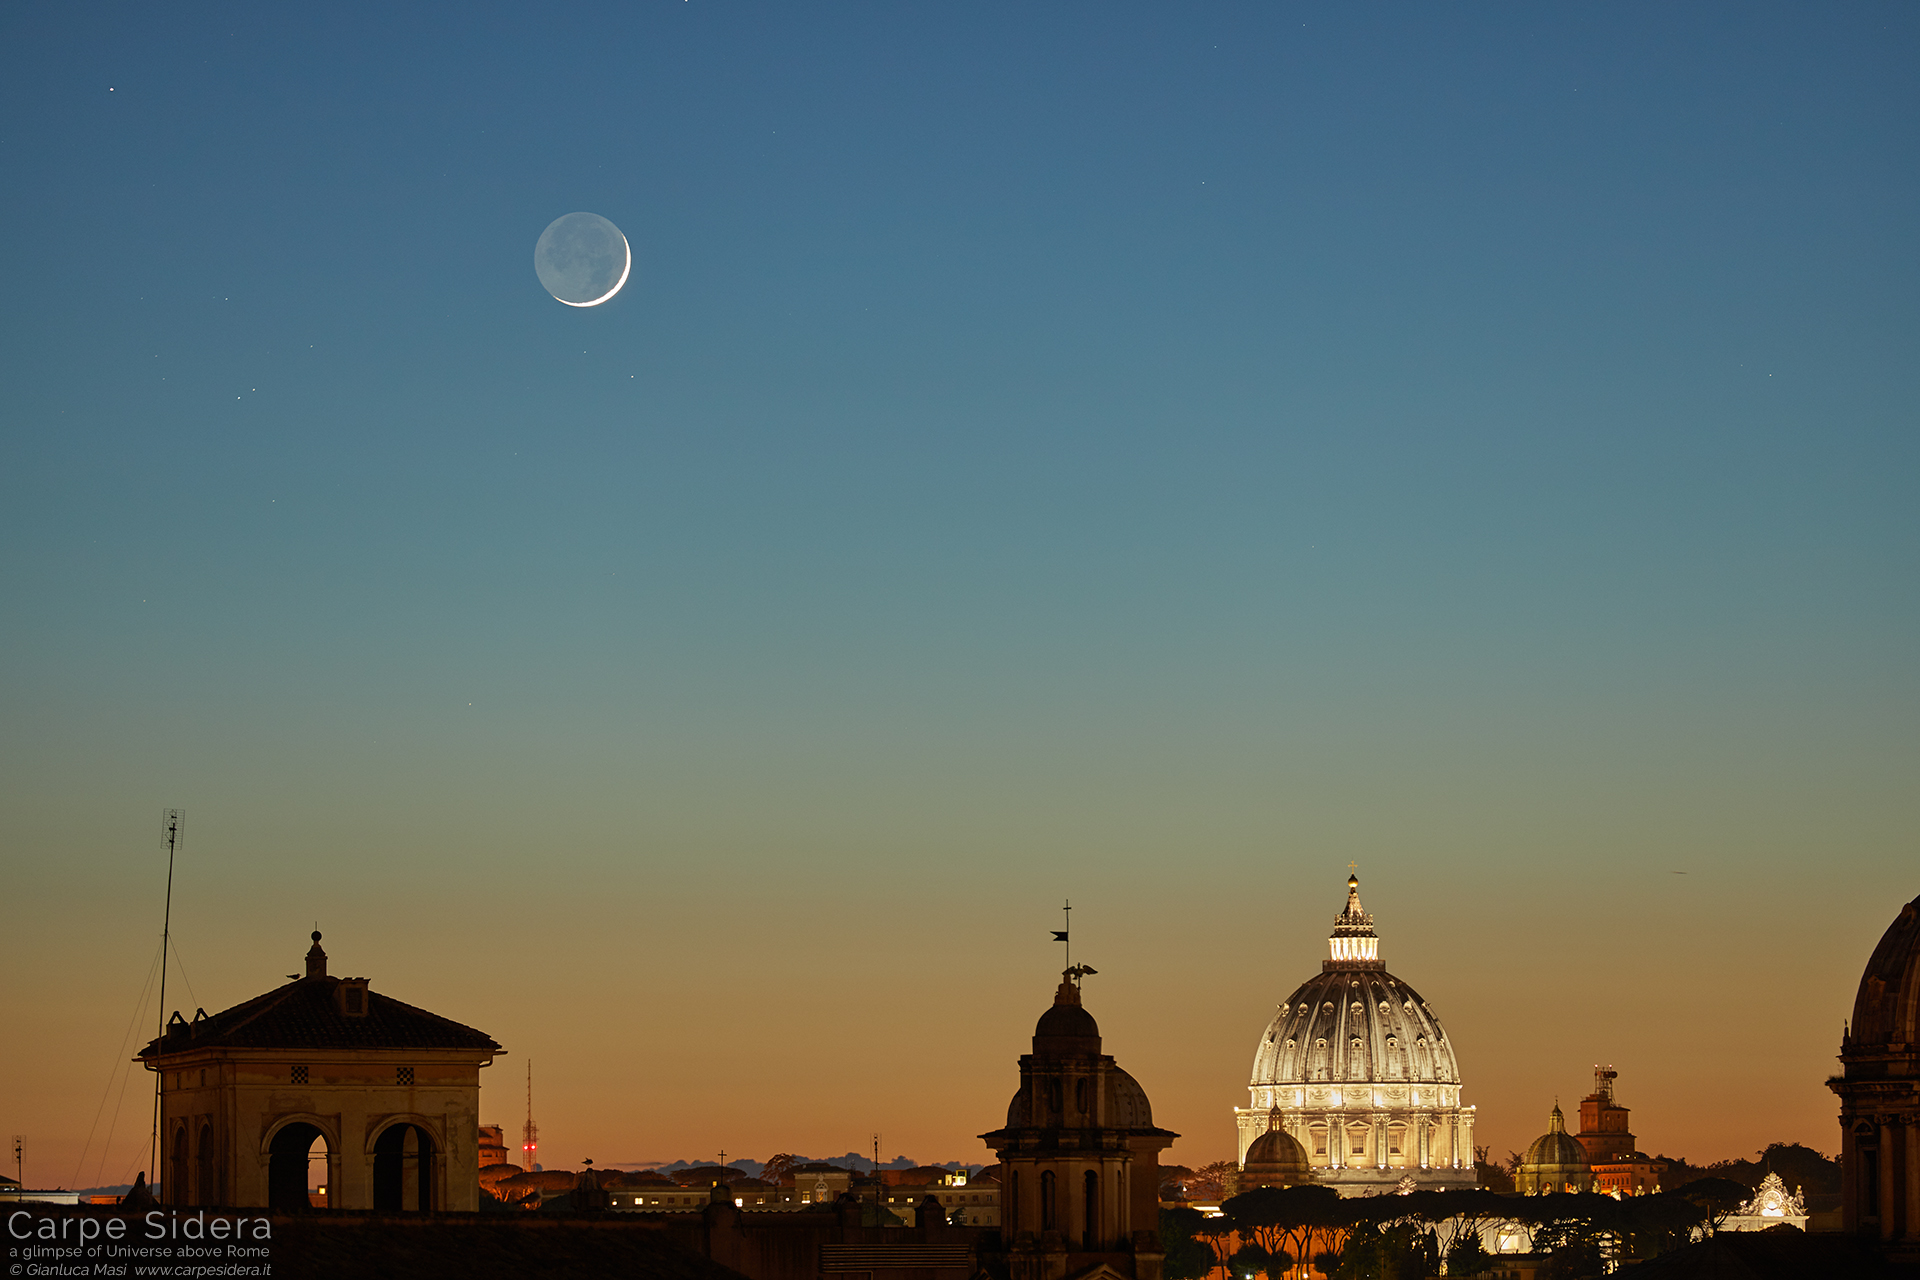 A sharp Moon crescent adds its speechless beauty above St. Peter's Dome, at sunset. The star Aldebaran is visible in the upper left corner.